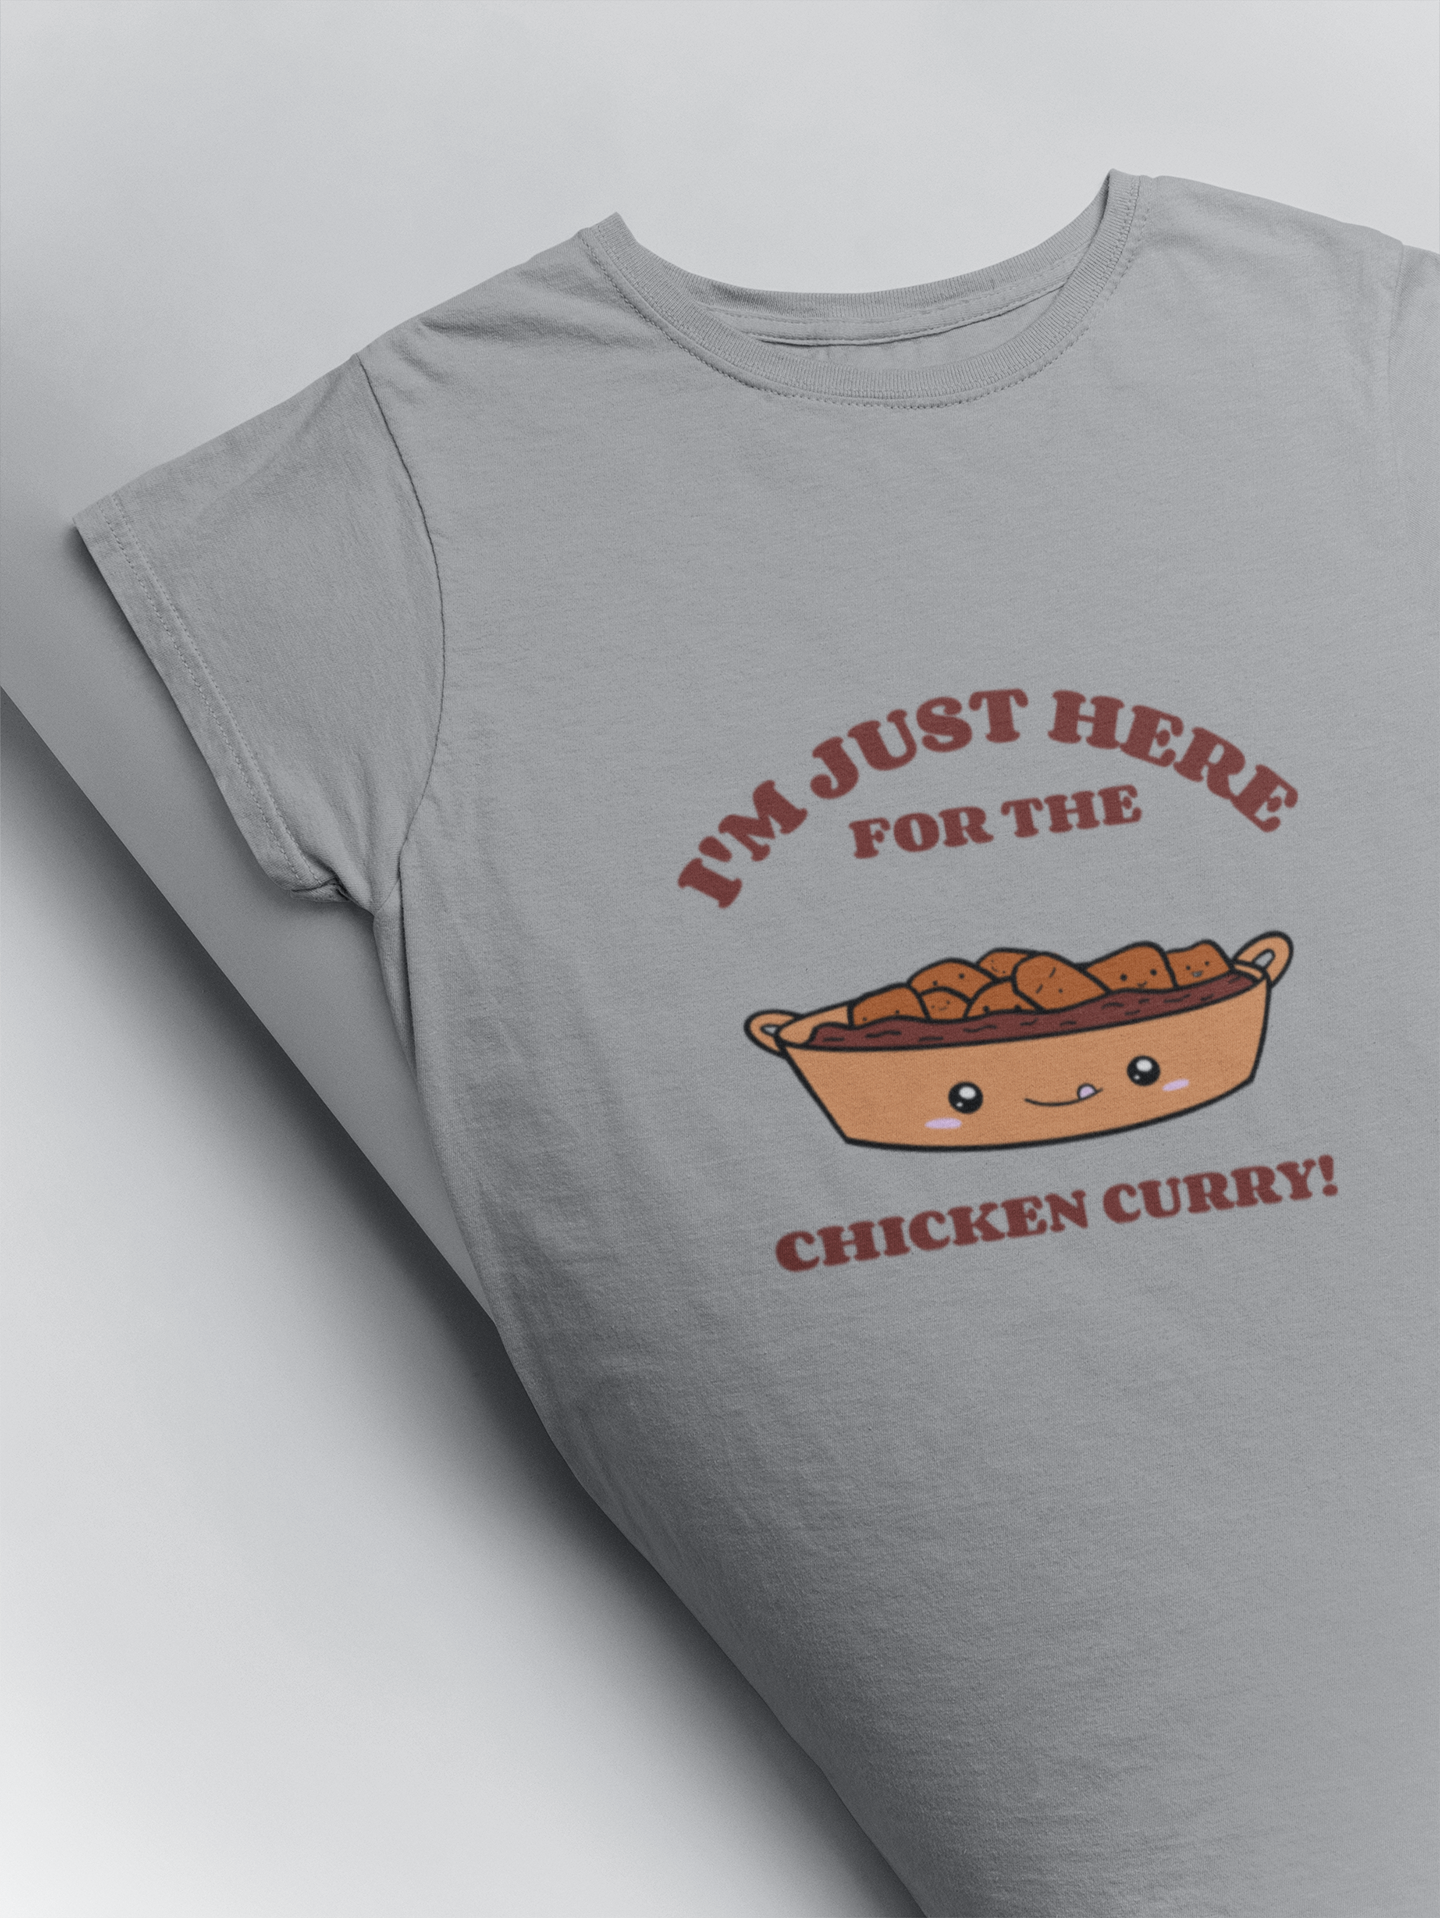 I am just here for the chicken curry funny illustrated printed t shirt in melange grey colour at Muselot